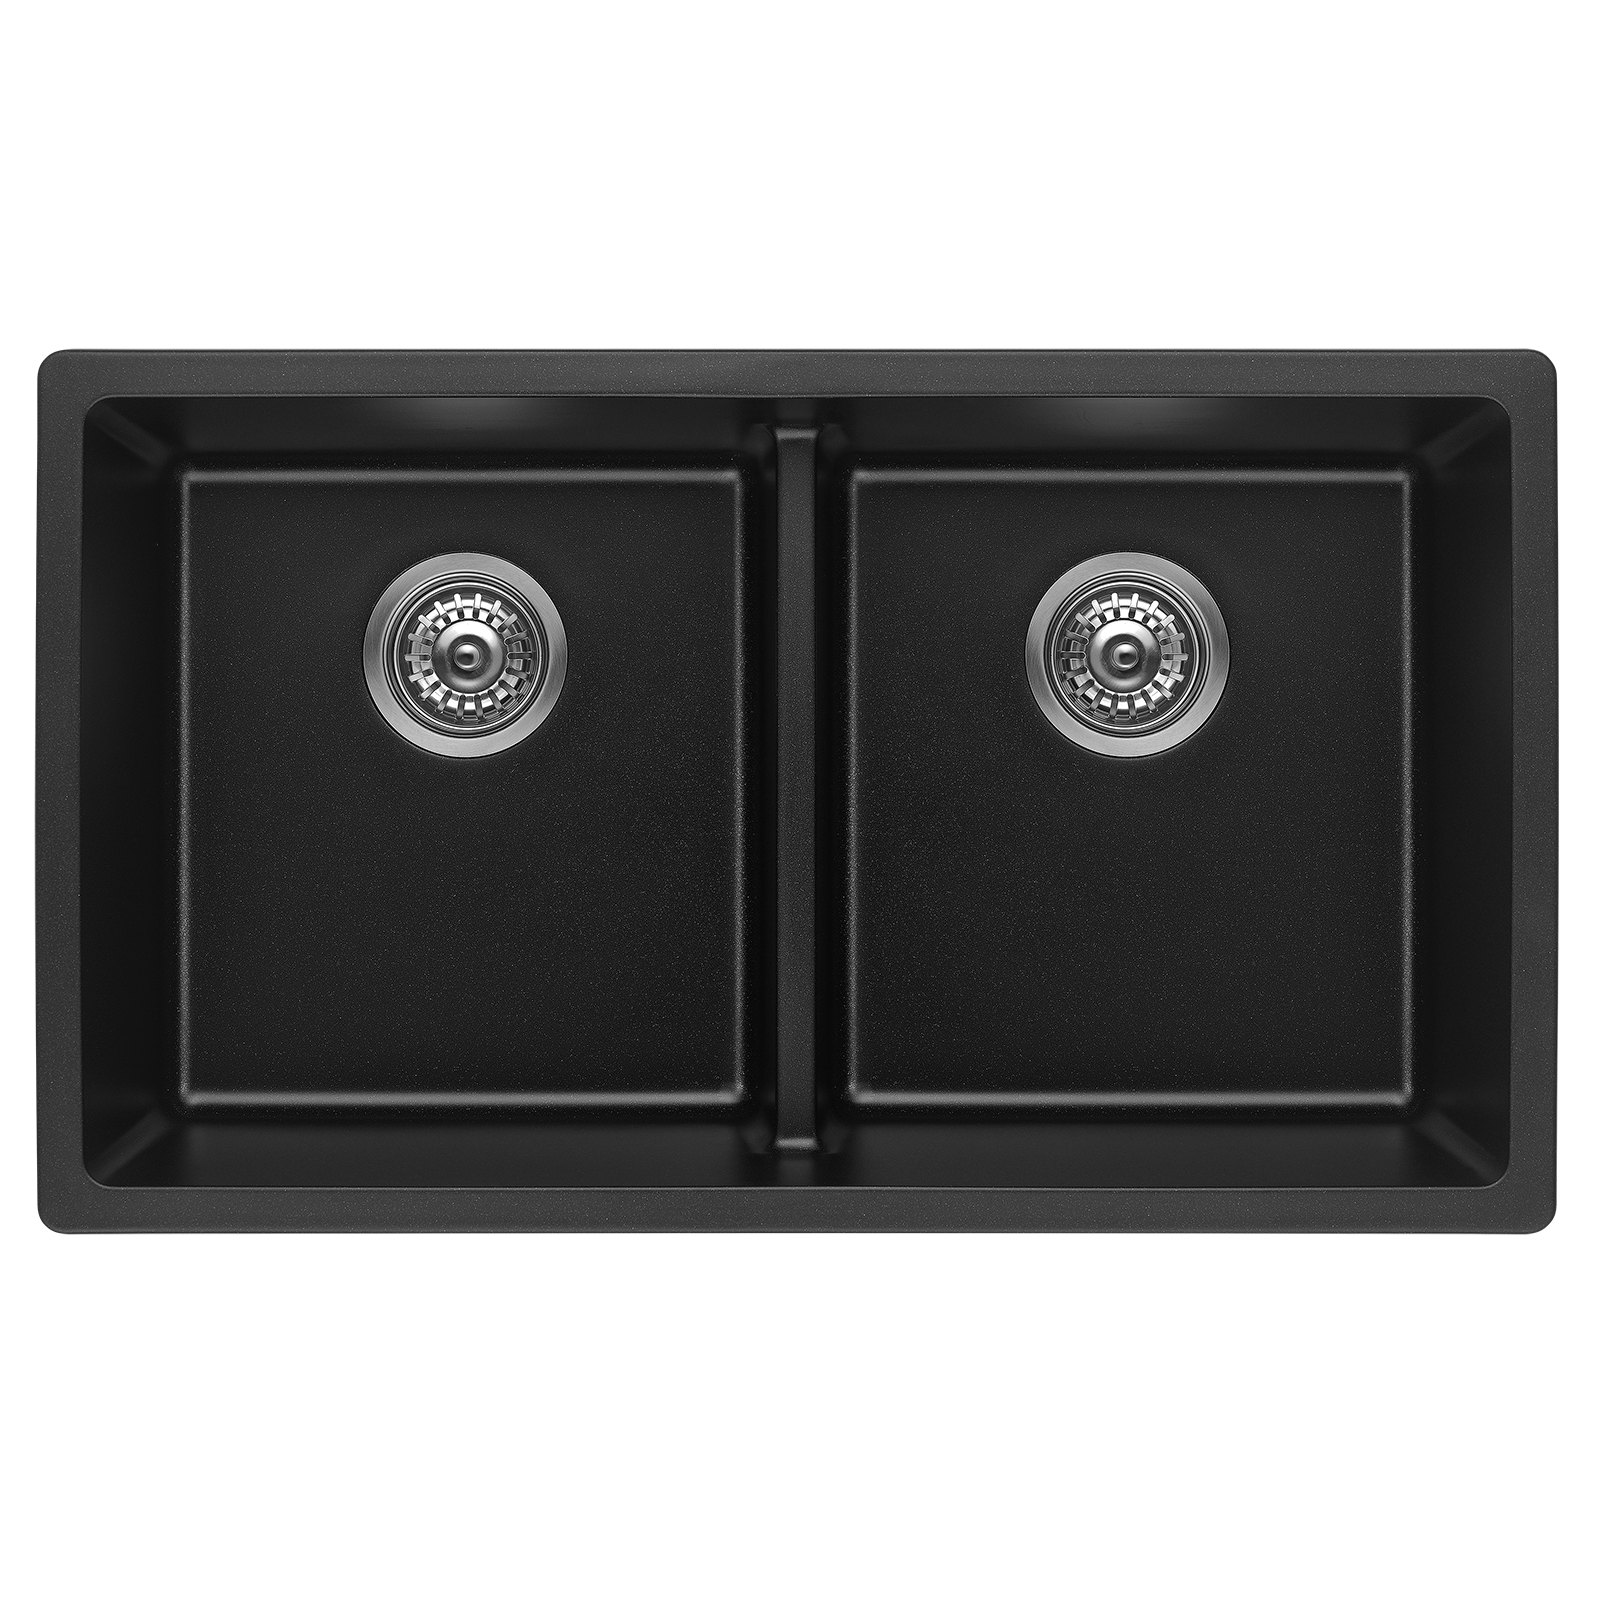 Fomos Double Bowl Sink